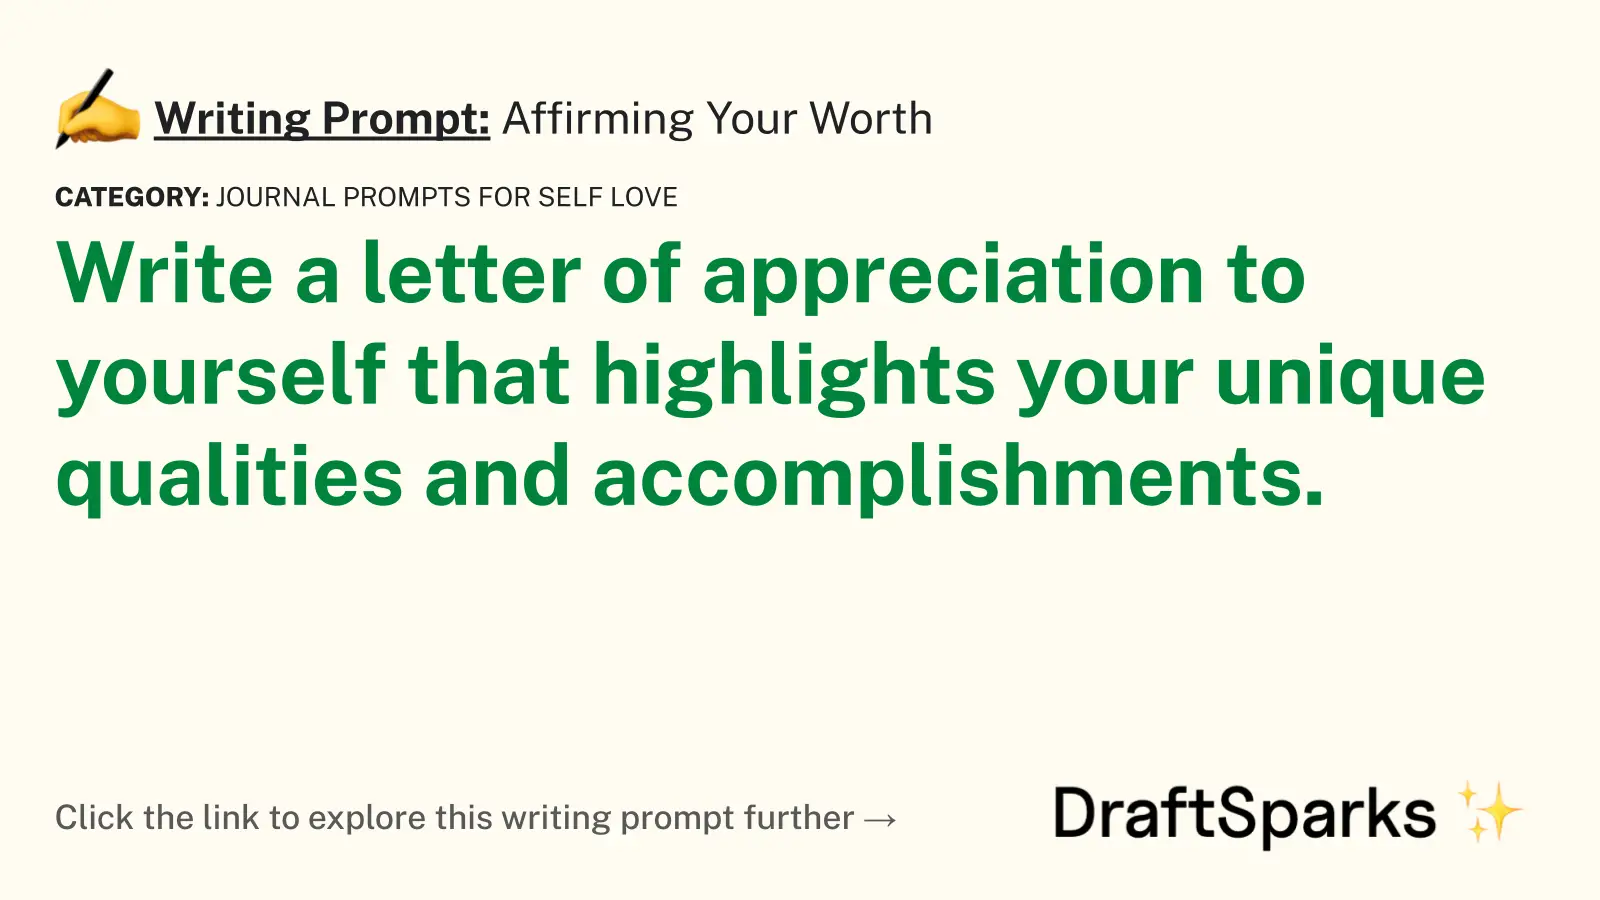 Affirming Your Worth